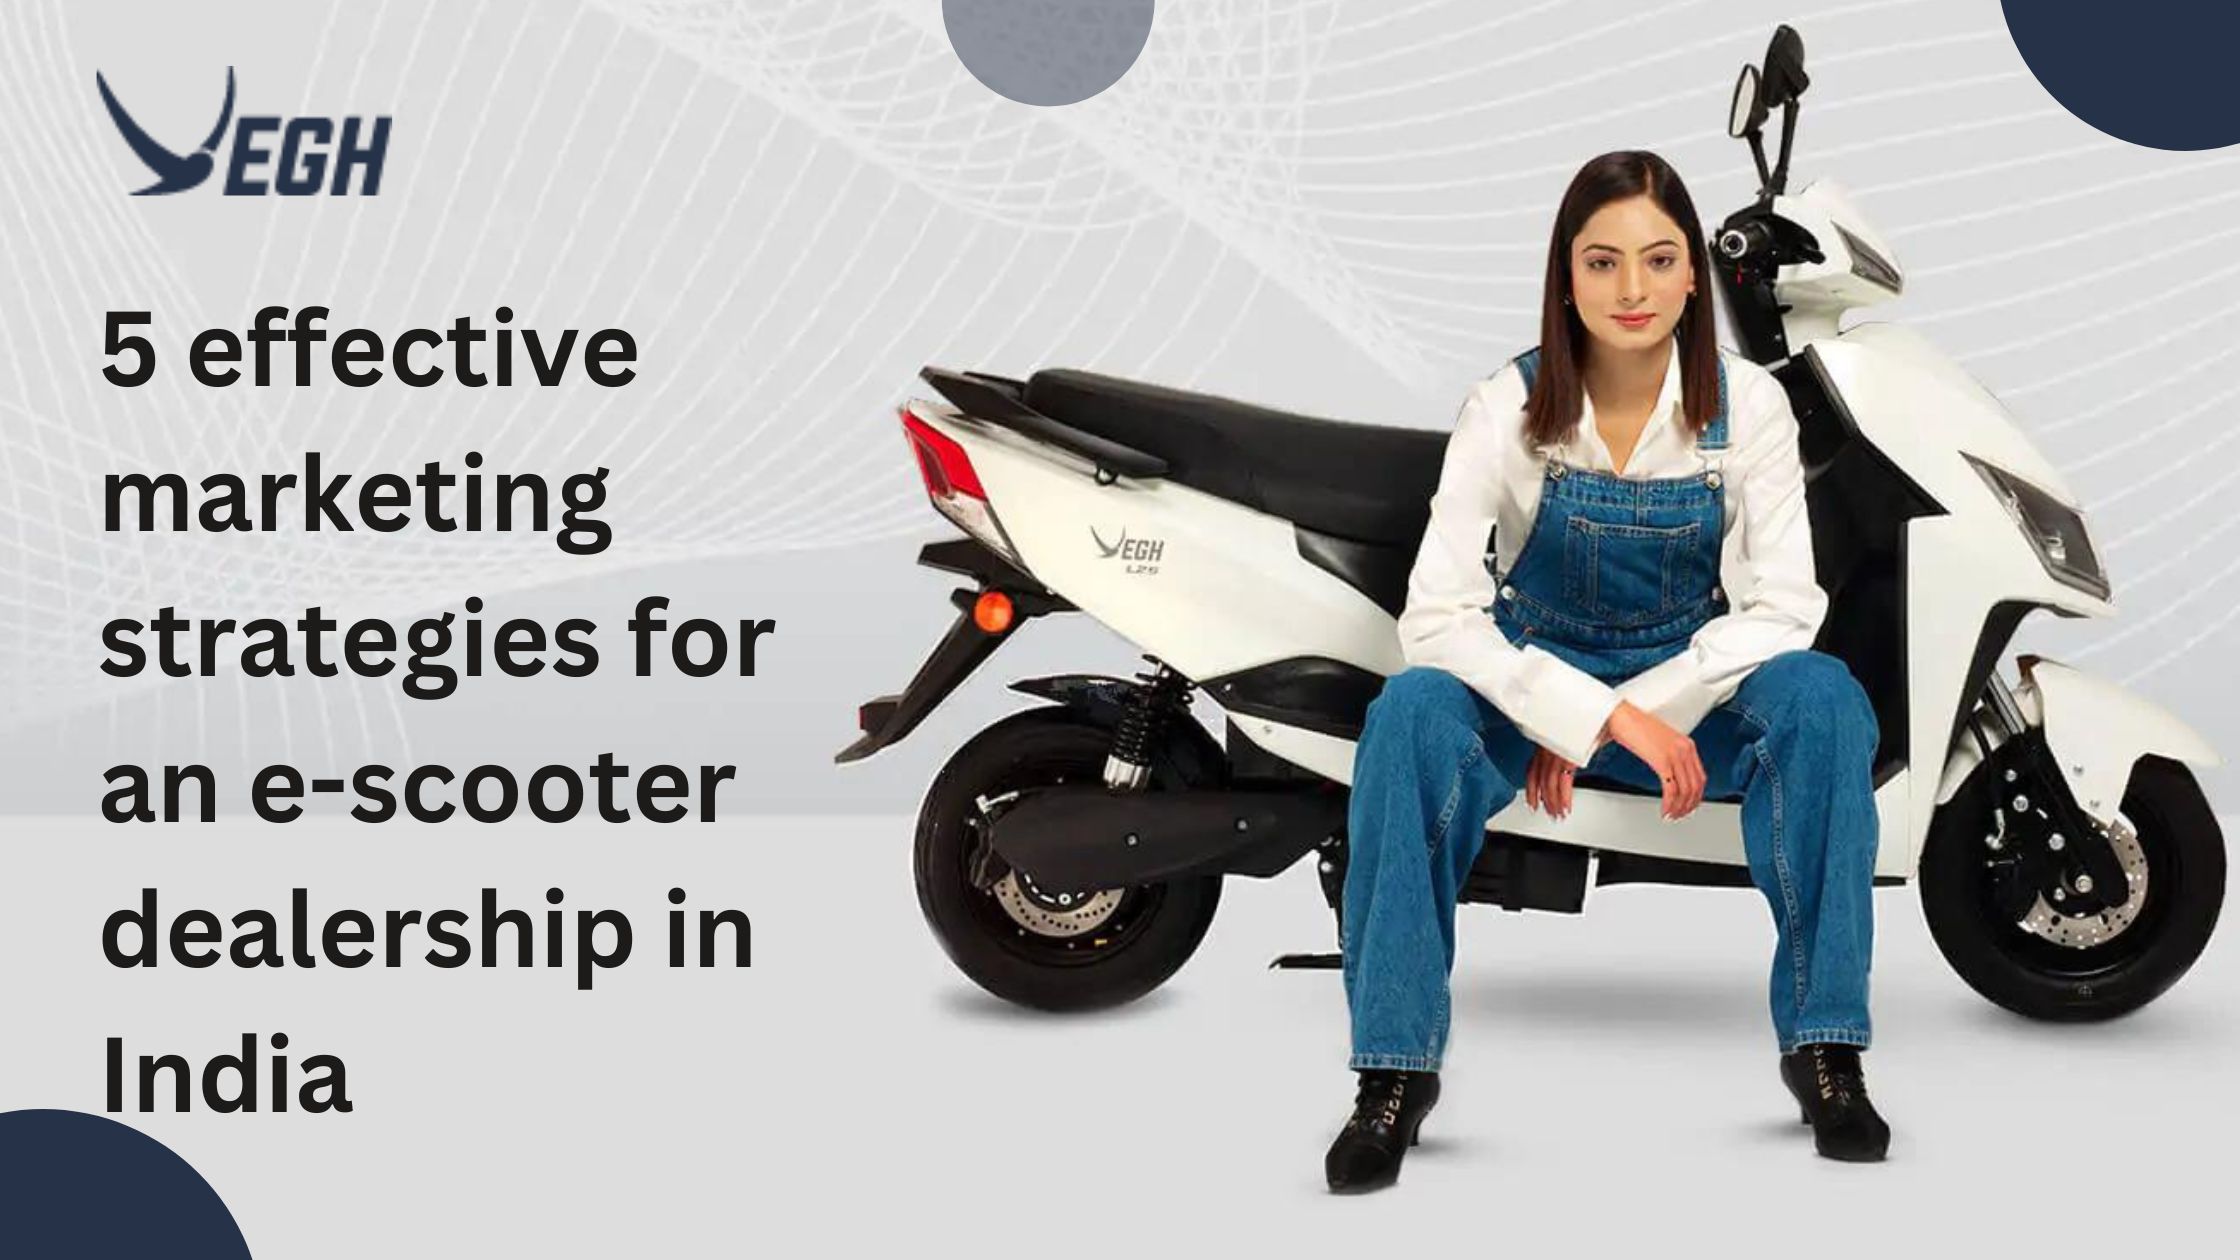 5 effective marketing strategies for an e-scooter dealership in India